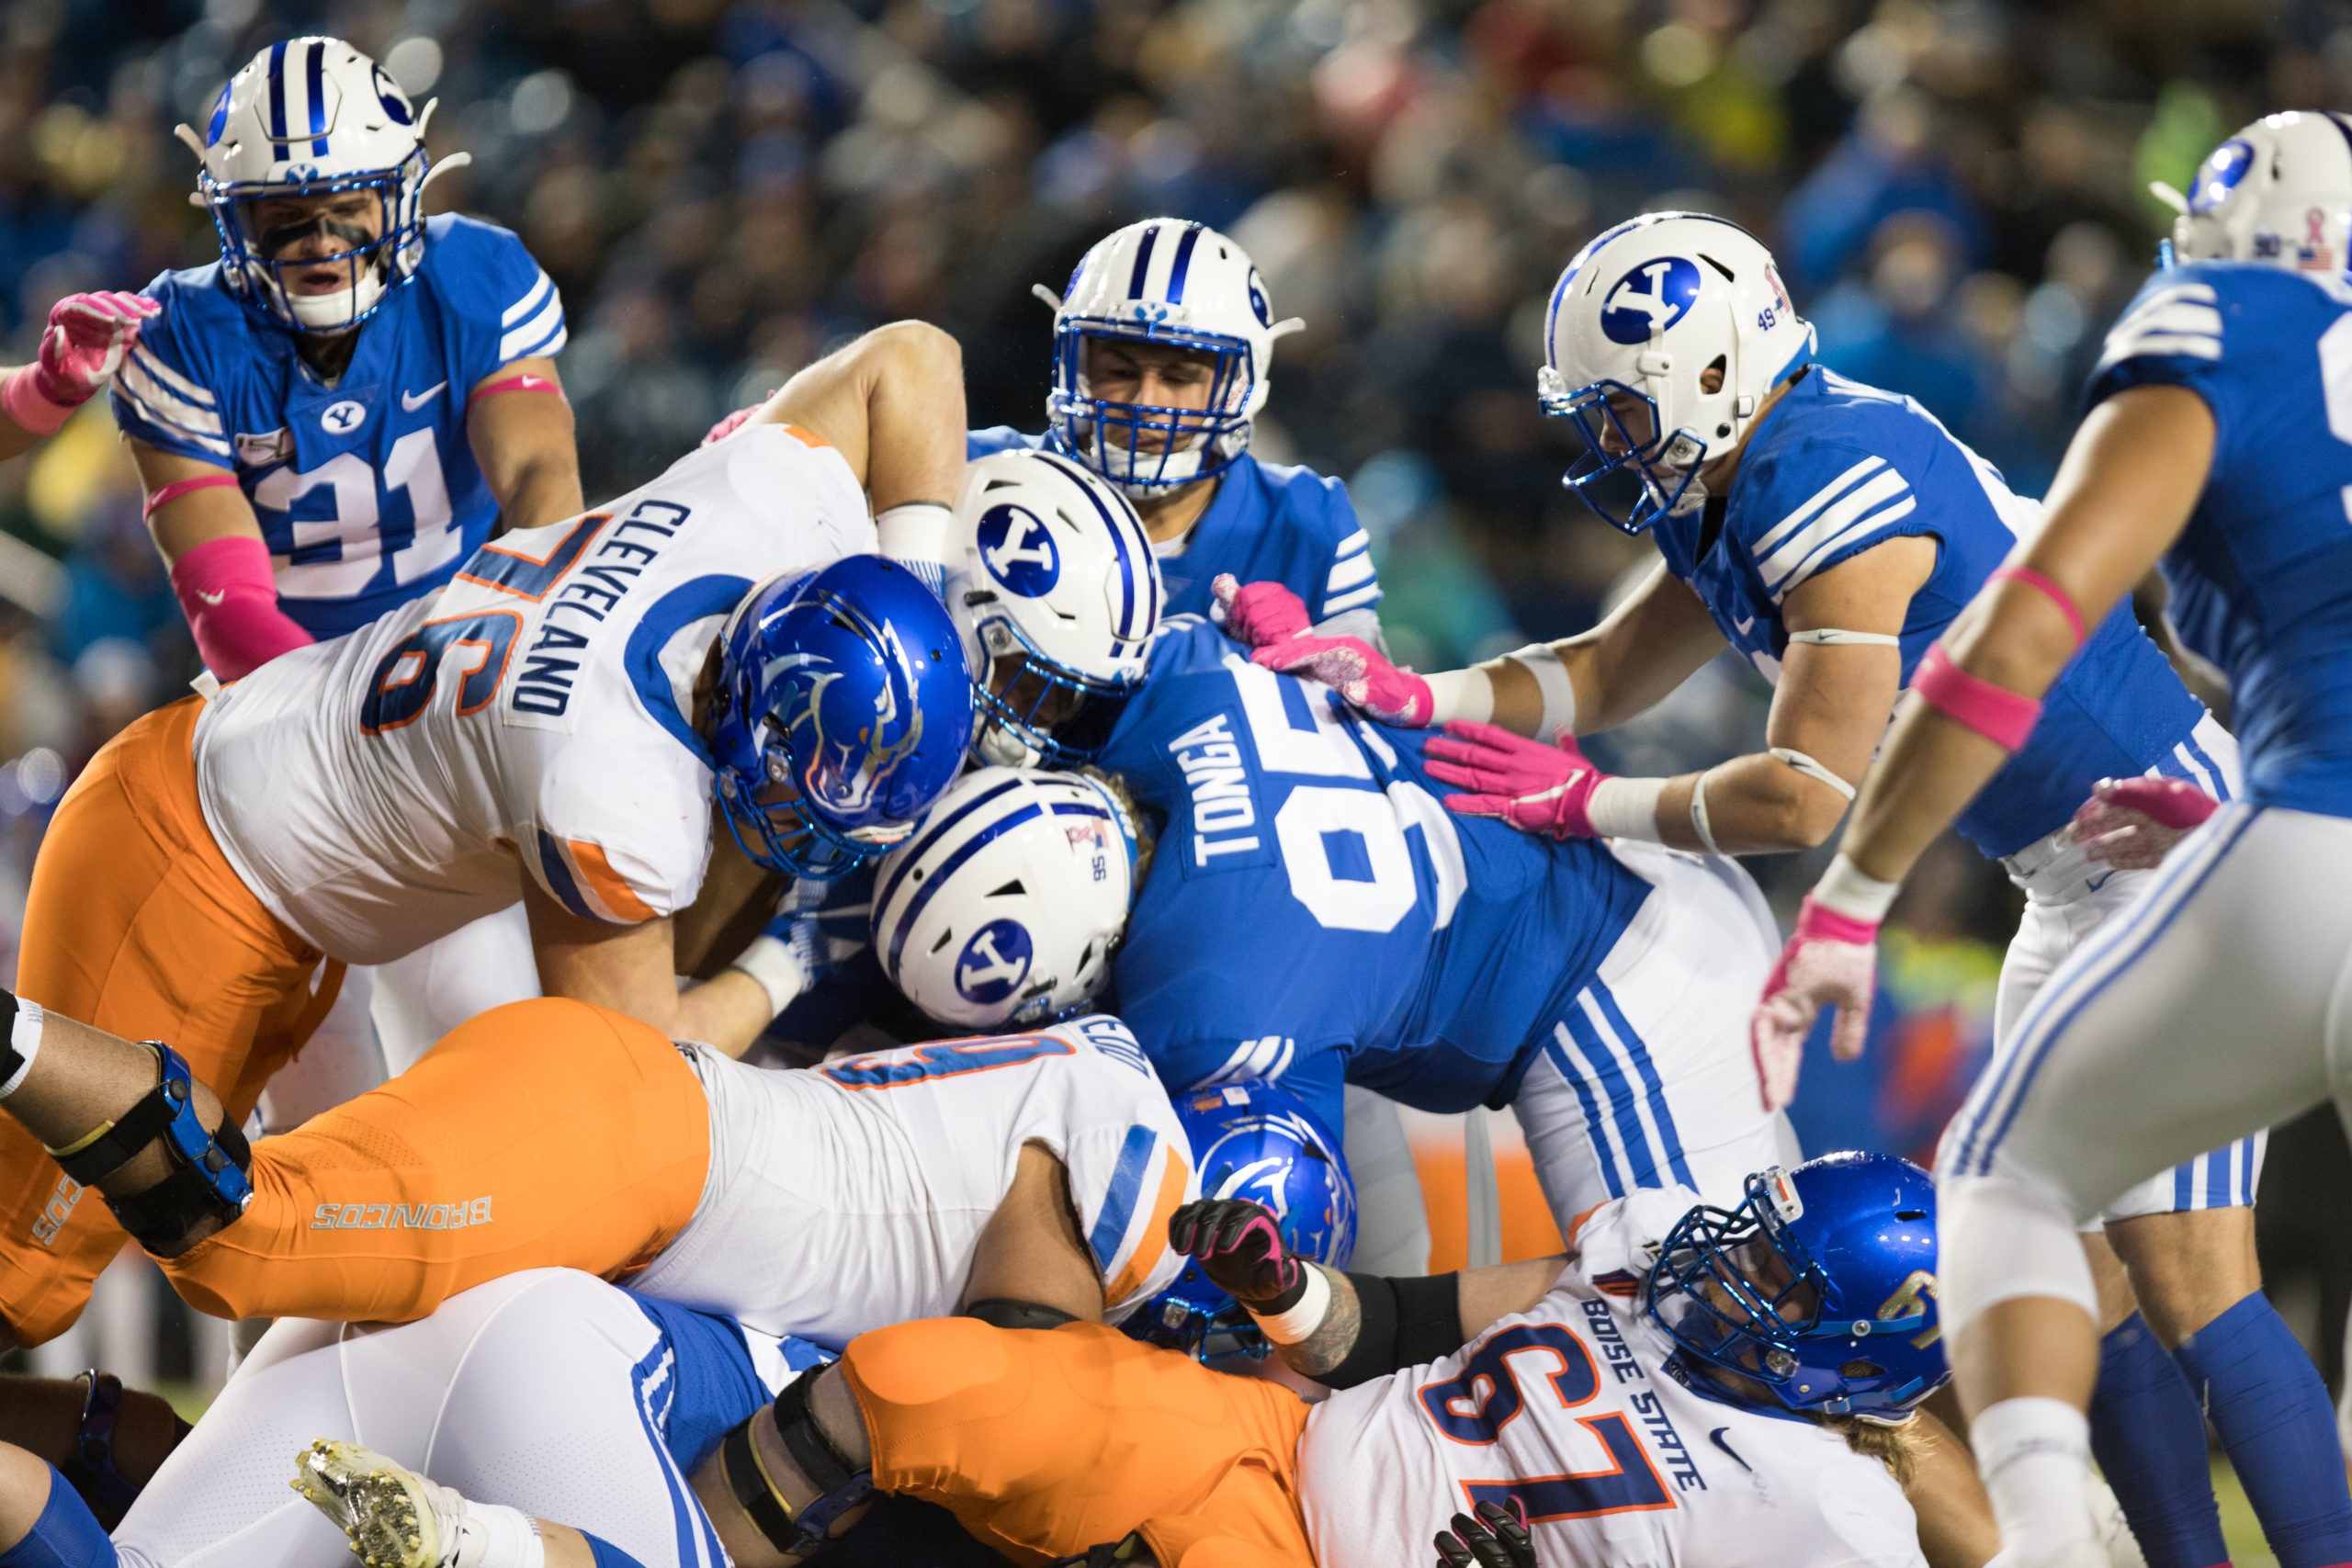 BYU Football travels to Boise State for first ranked matchup of season